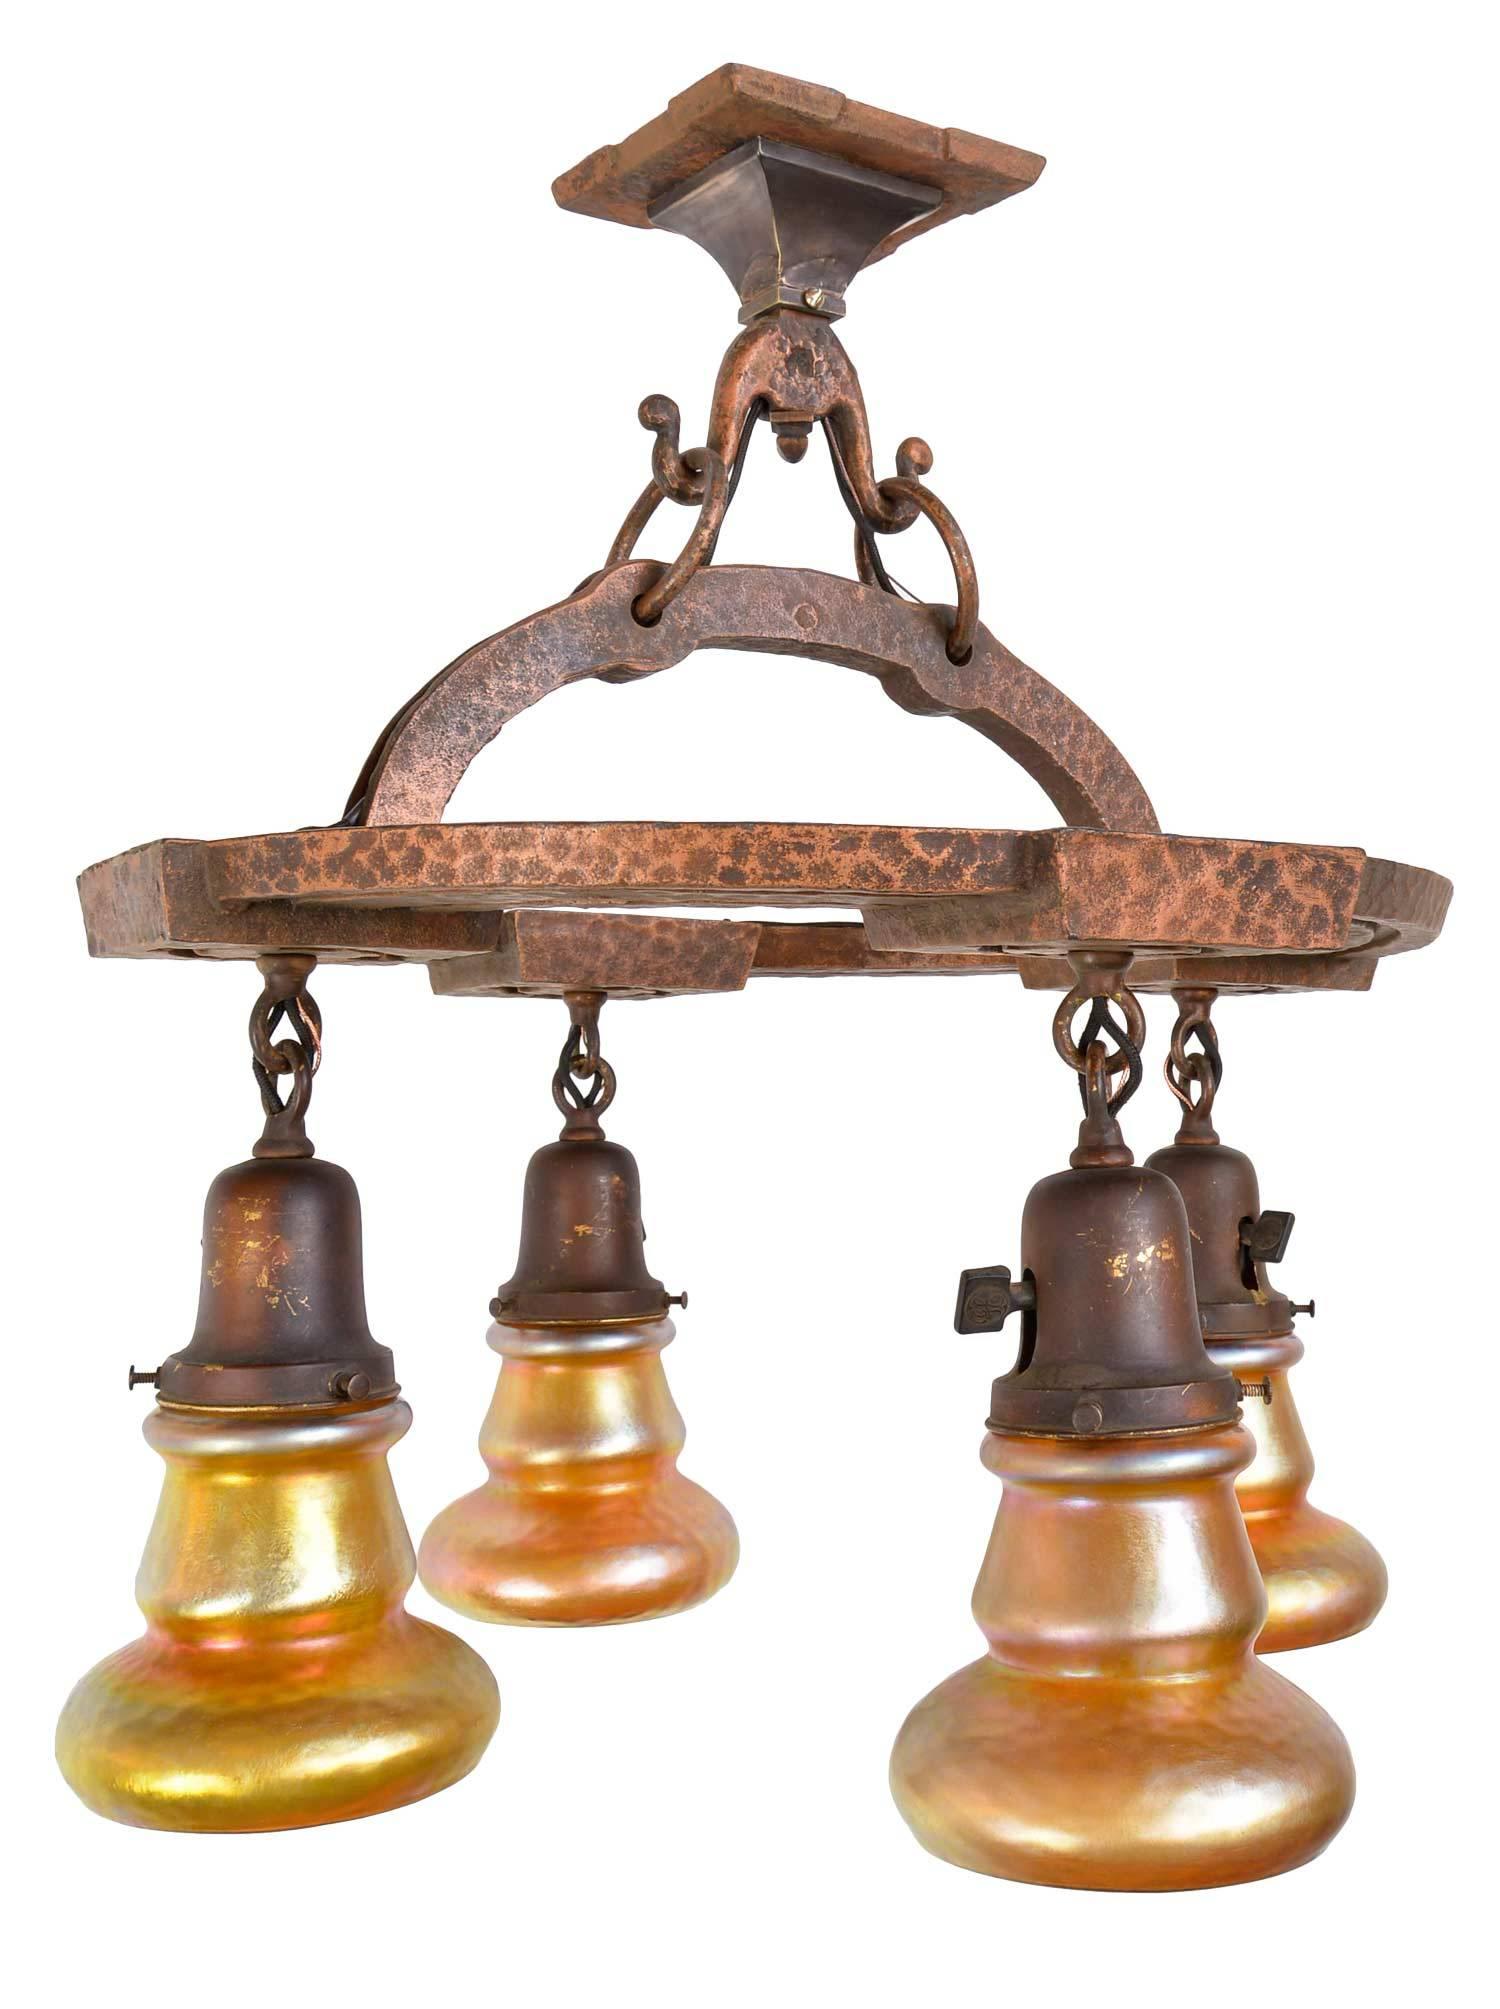 This is an exceptional turn-of-the-century Arts and Crafts cast iron, ring chandelier that includes an amazing set of Quezal shades, unusual in shape and finish. This light is an impeccable example of Arts and Crafts lighting with a wonderful